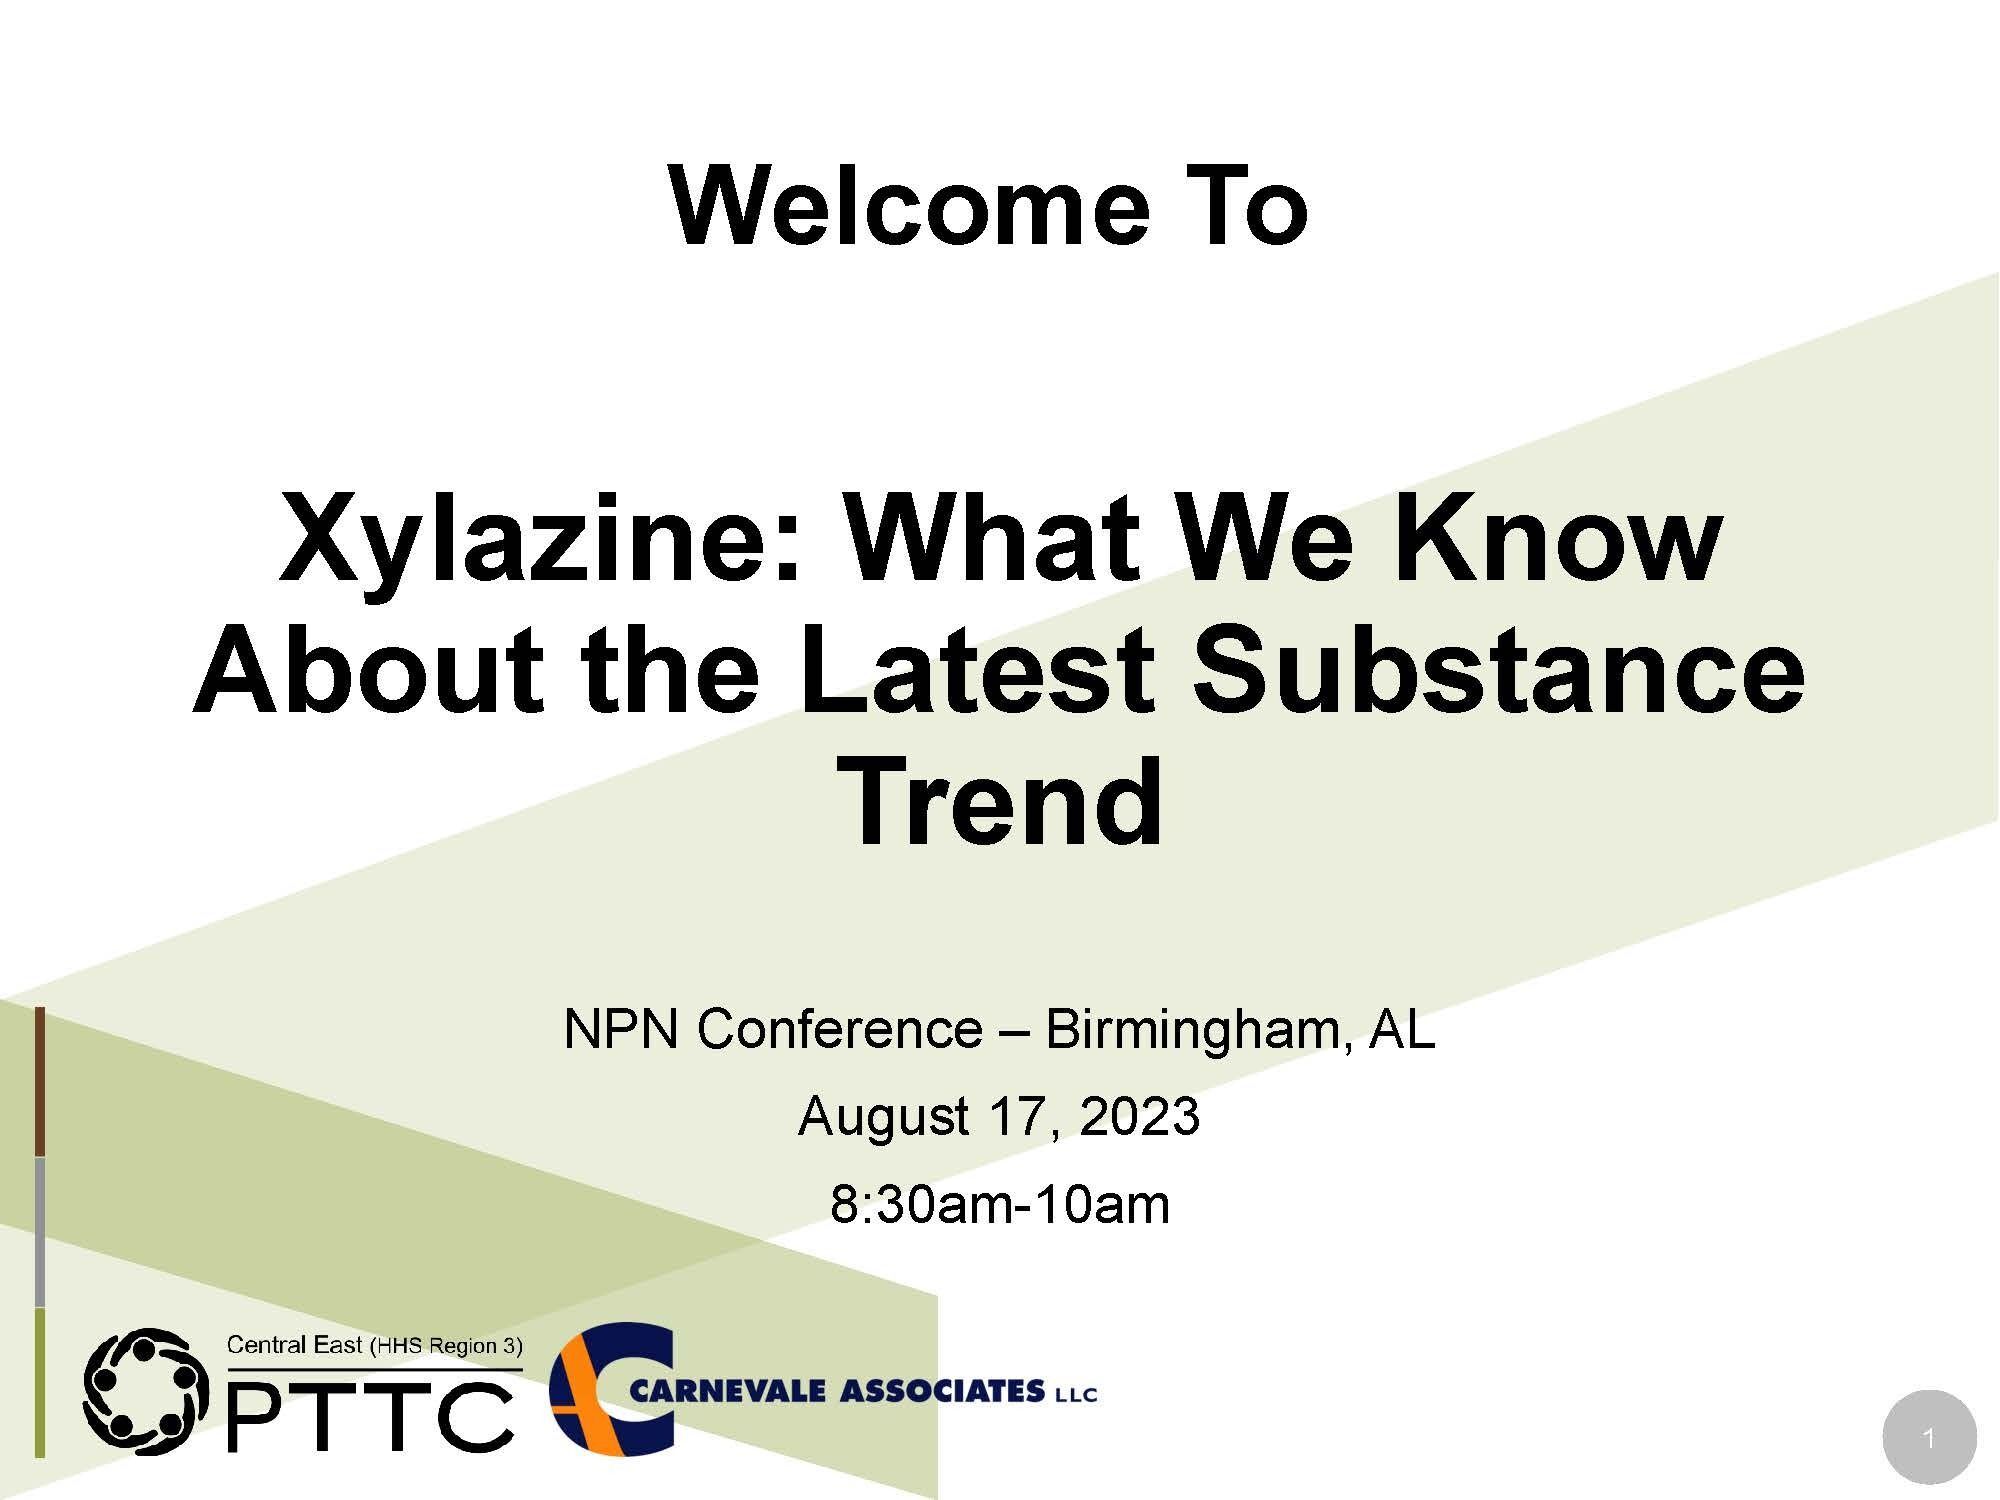 Xylazine: What We Know About the Latest Substance Trend